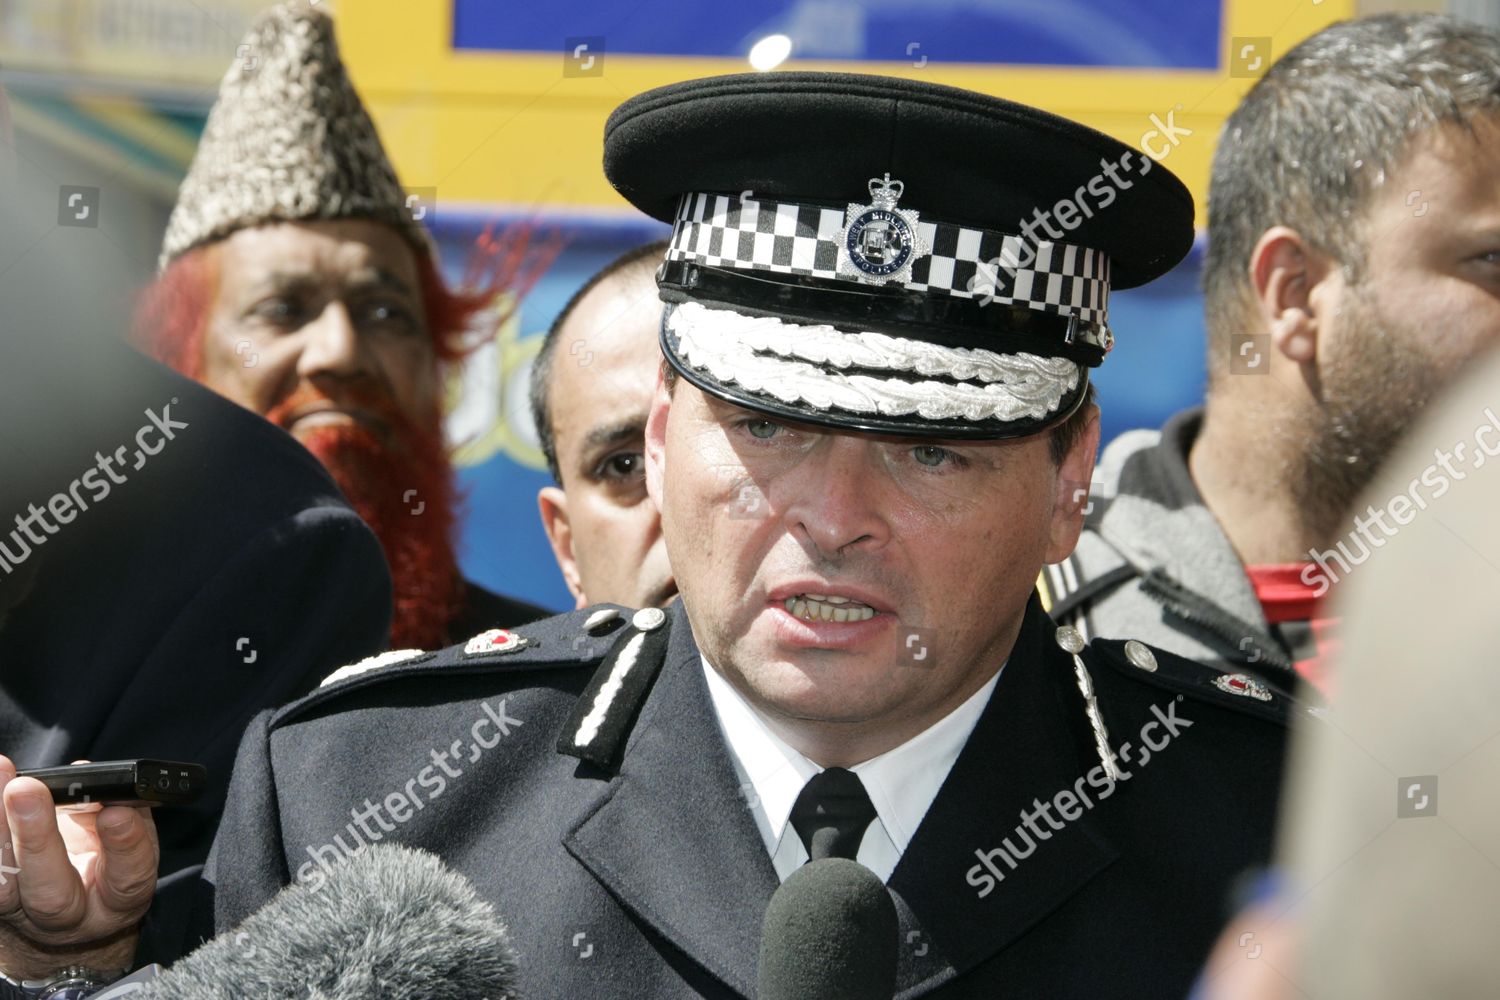 West Midland Police Chief Constable Chris Editorial Stock Photo Stock